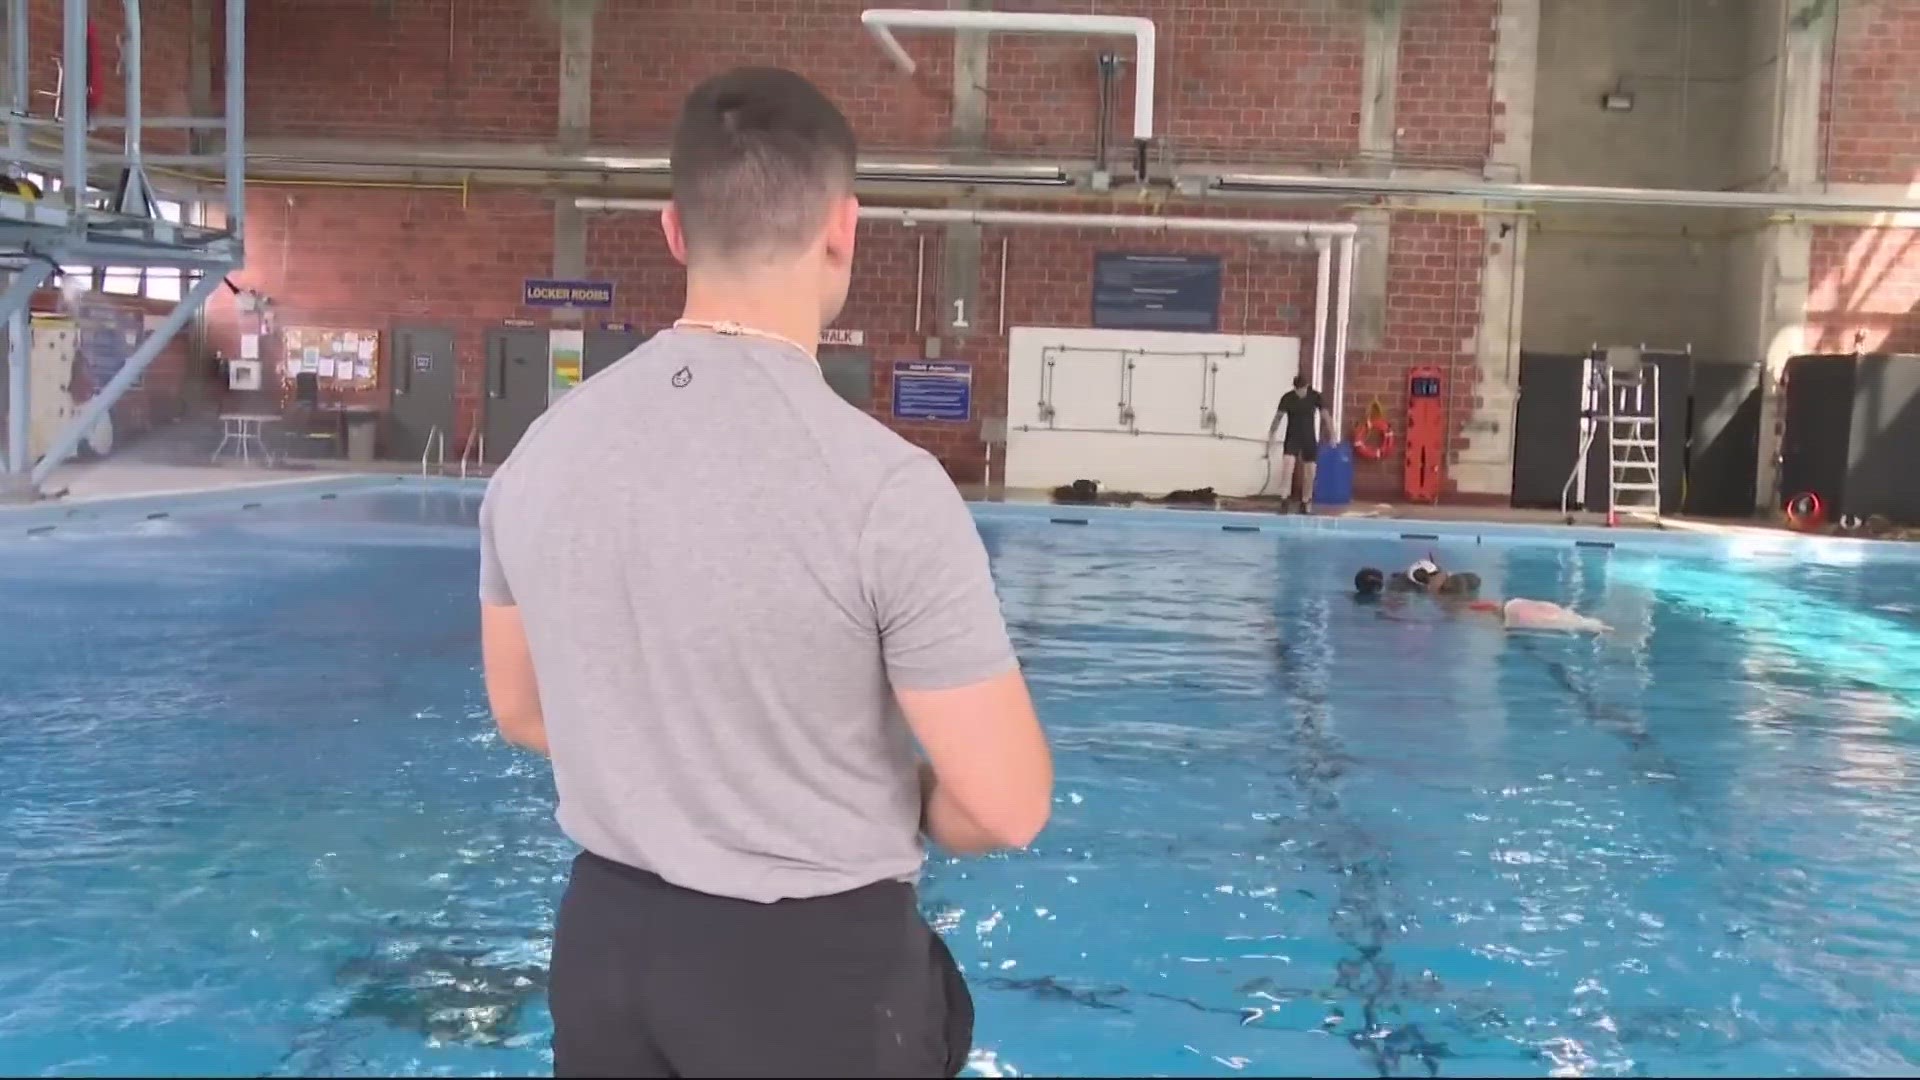 Long before anyone needs to be rescued in the open water, Operations Specialist 2nd class Michael Parra trains rescue swimmers in the pool at NAS Jax.